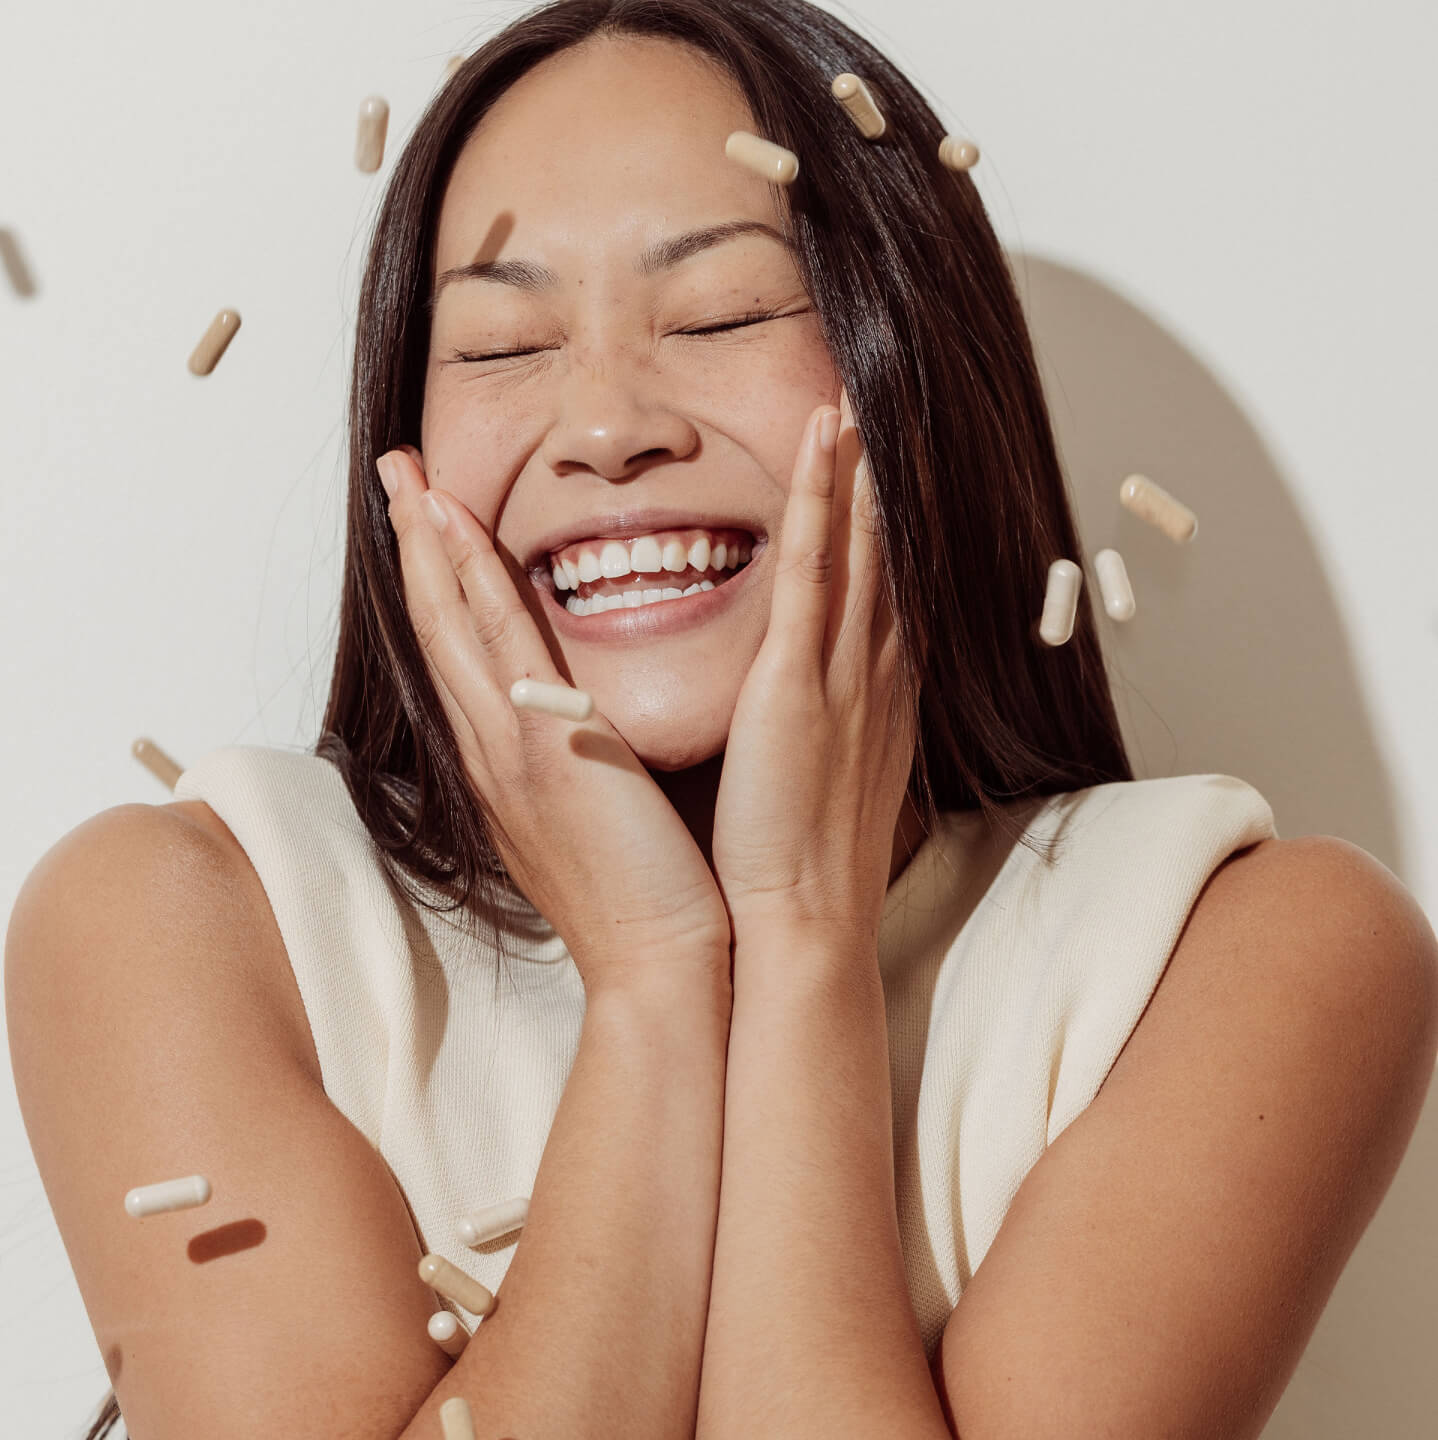 A woman smiles, and holds her cheeks while arrae capsules fall around her like confetti